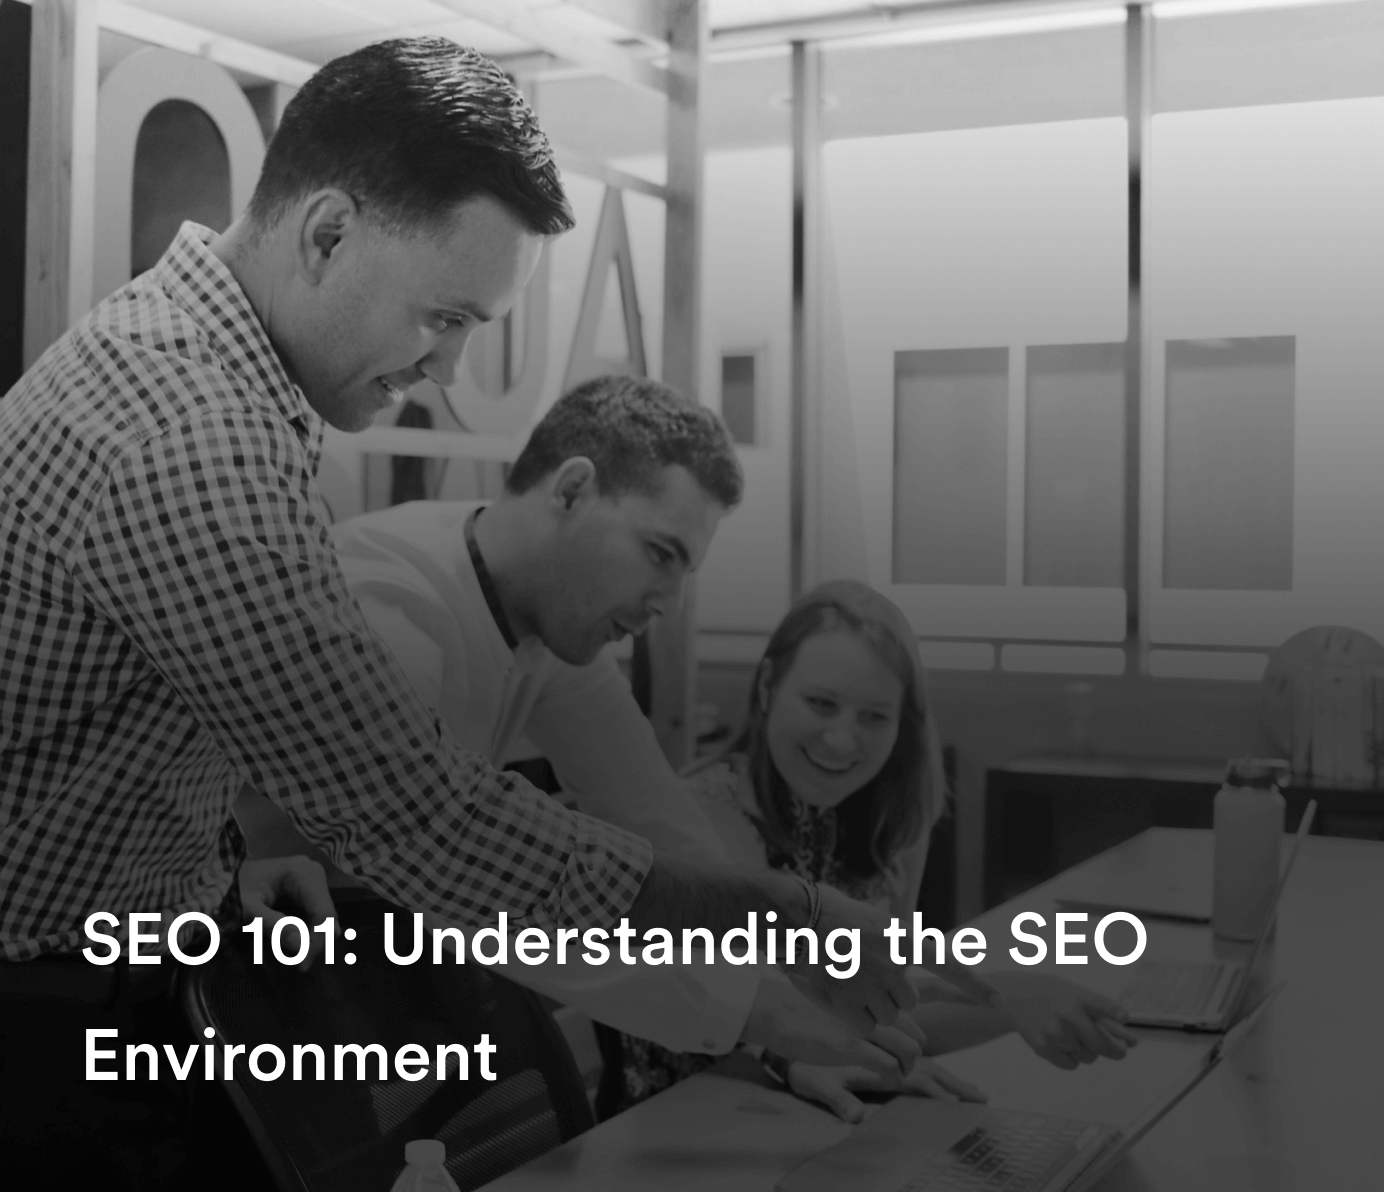 SEO 101: A plumber's guide to understanding the SEO environment.